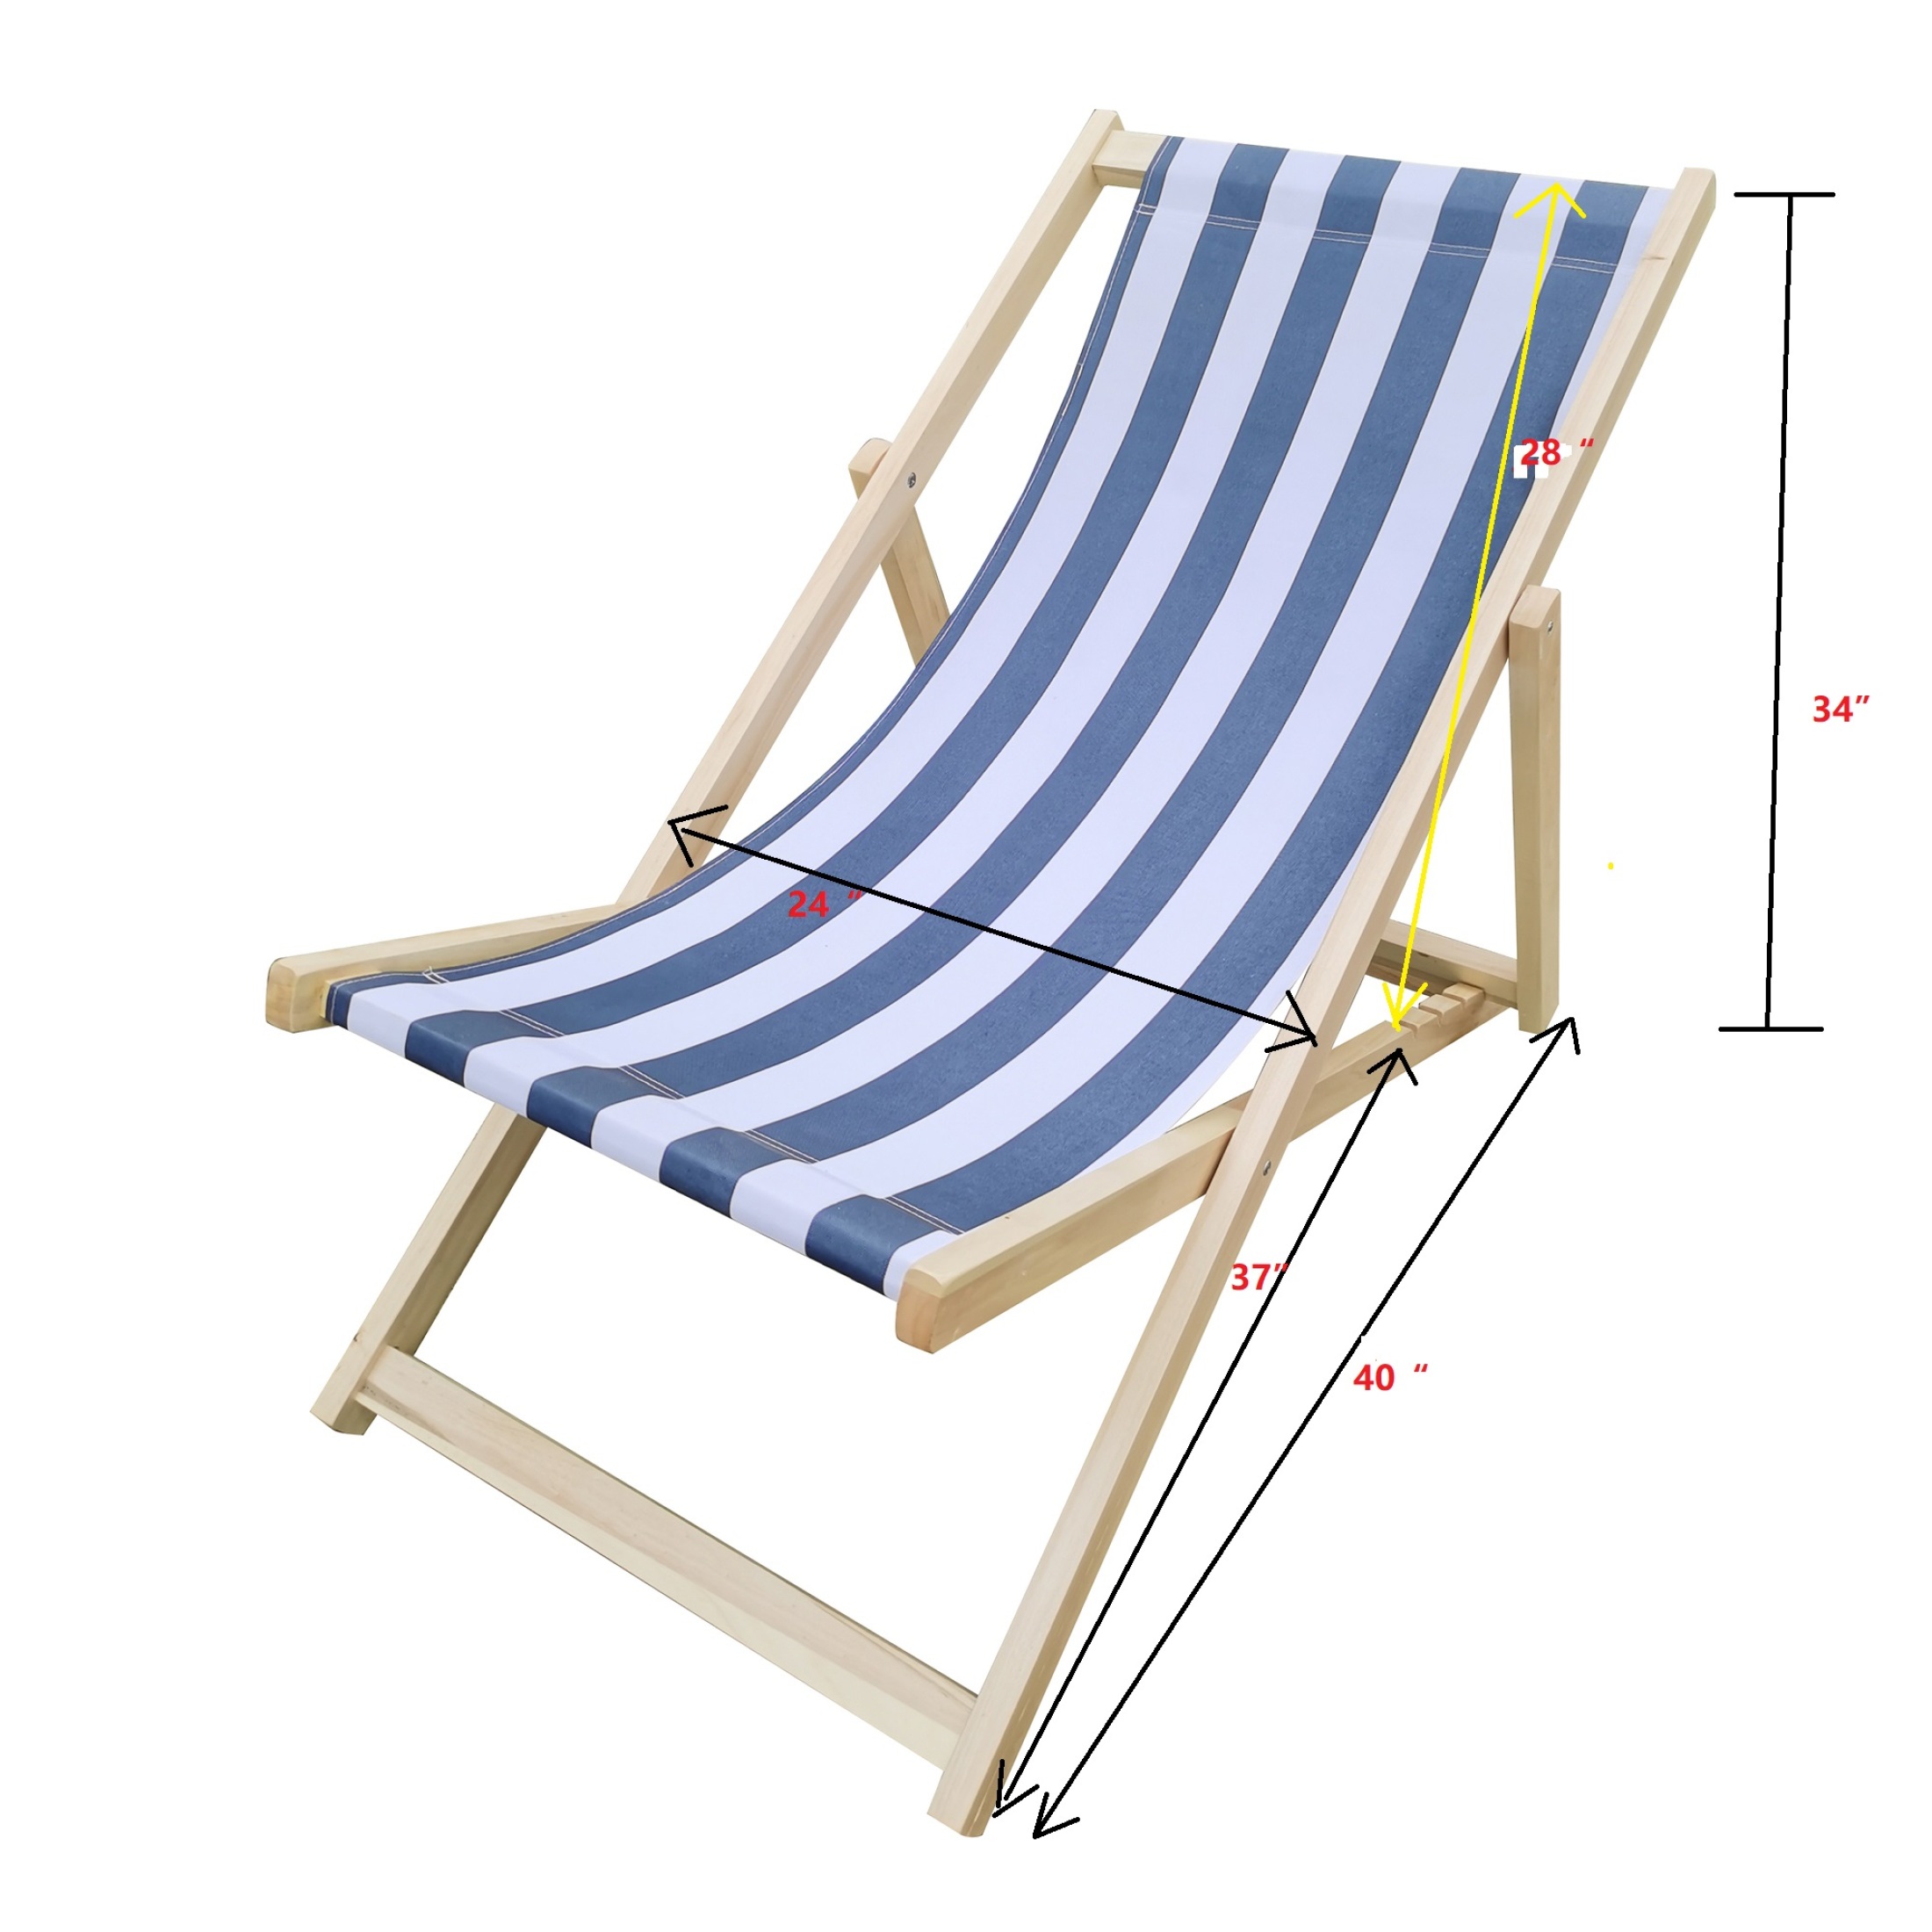 Pouseayar Foldable Sling Chair,Outdoor Beach Chair Chaise Lounge , Gray - image 3 of 8